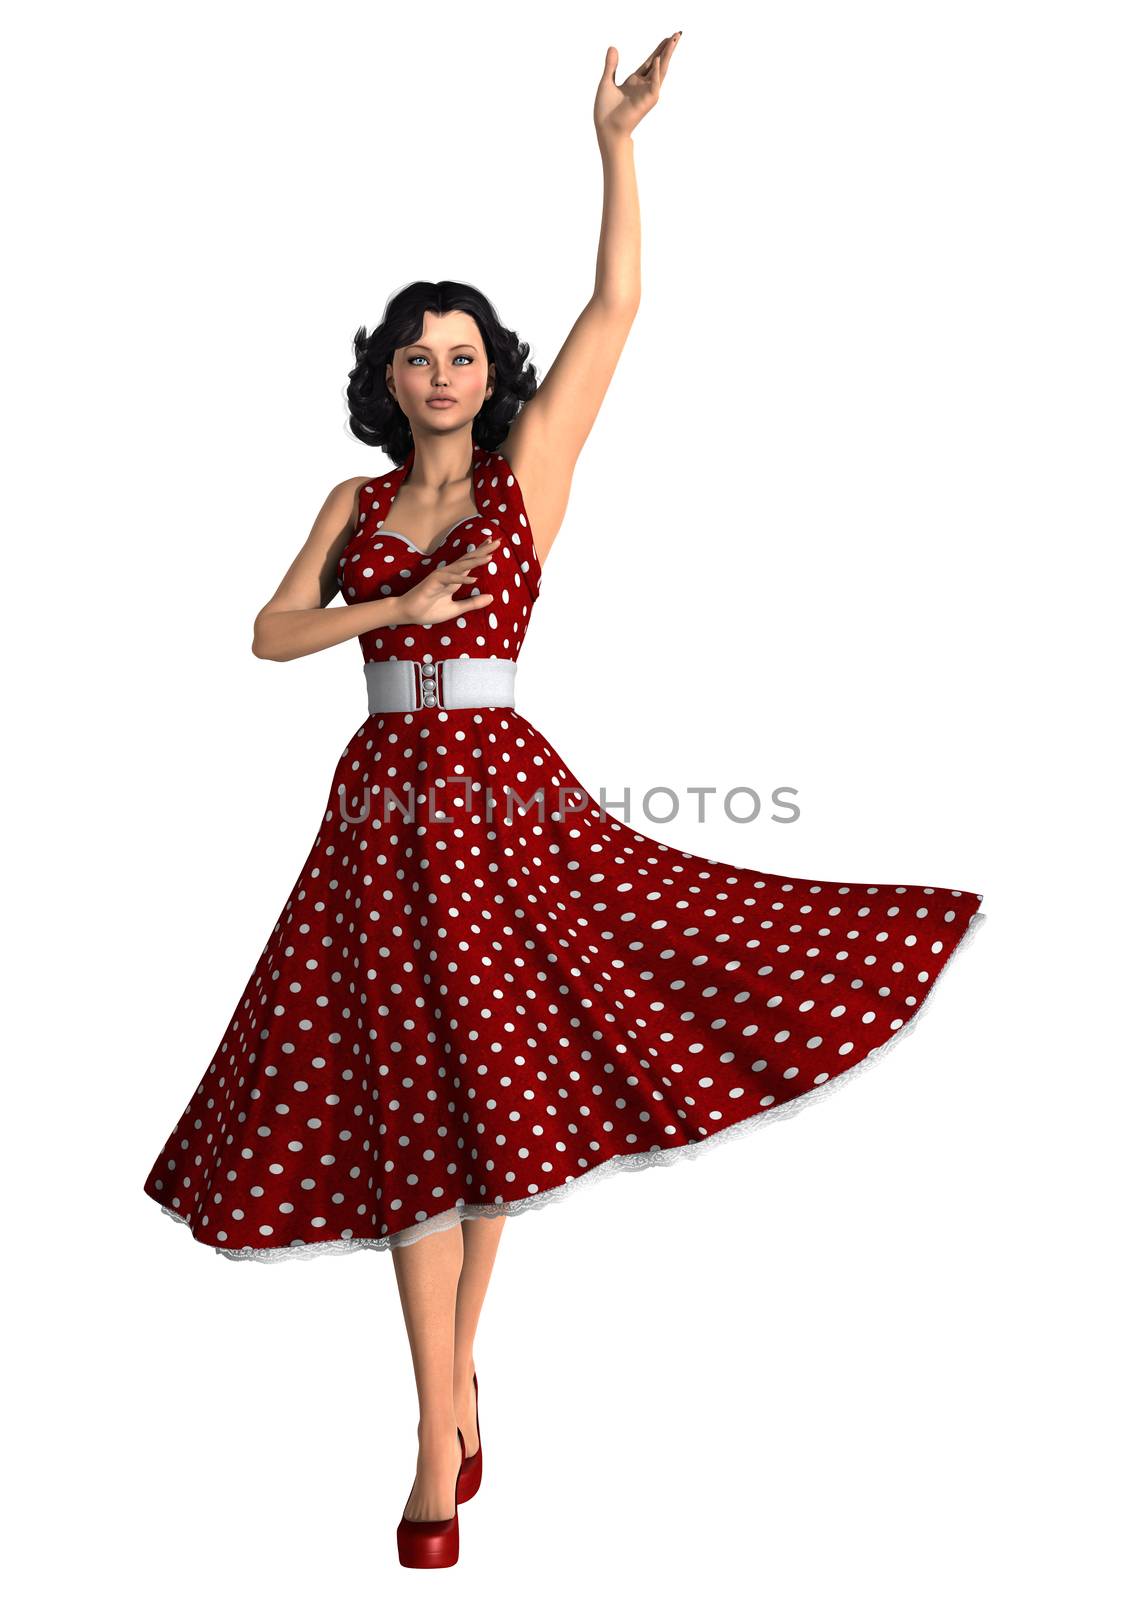 3D digital render of a beautiful vintage woman wearing a red polka dots dress isolated on white background